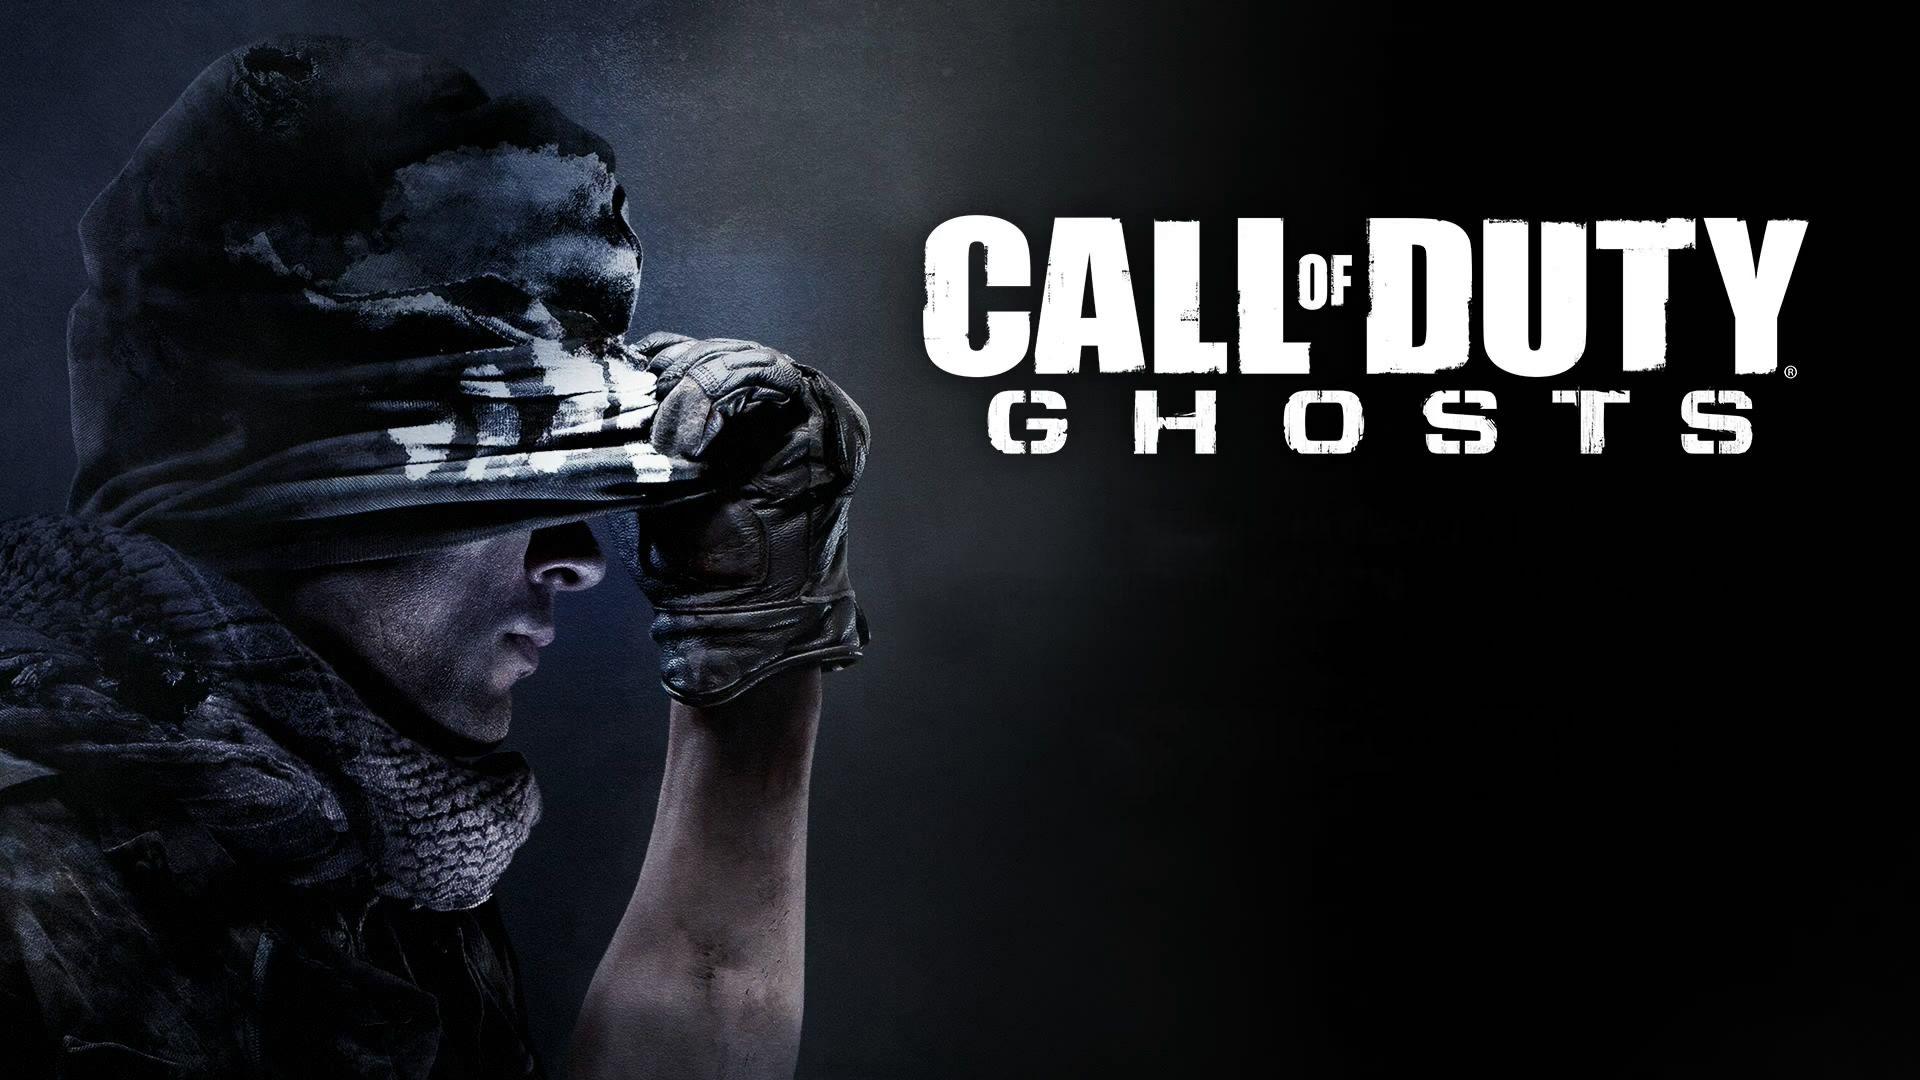 Call of Duty Ghosts PS4 Wallpaper